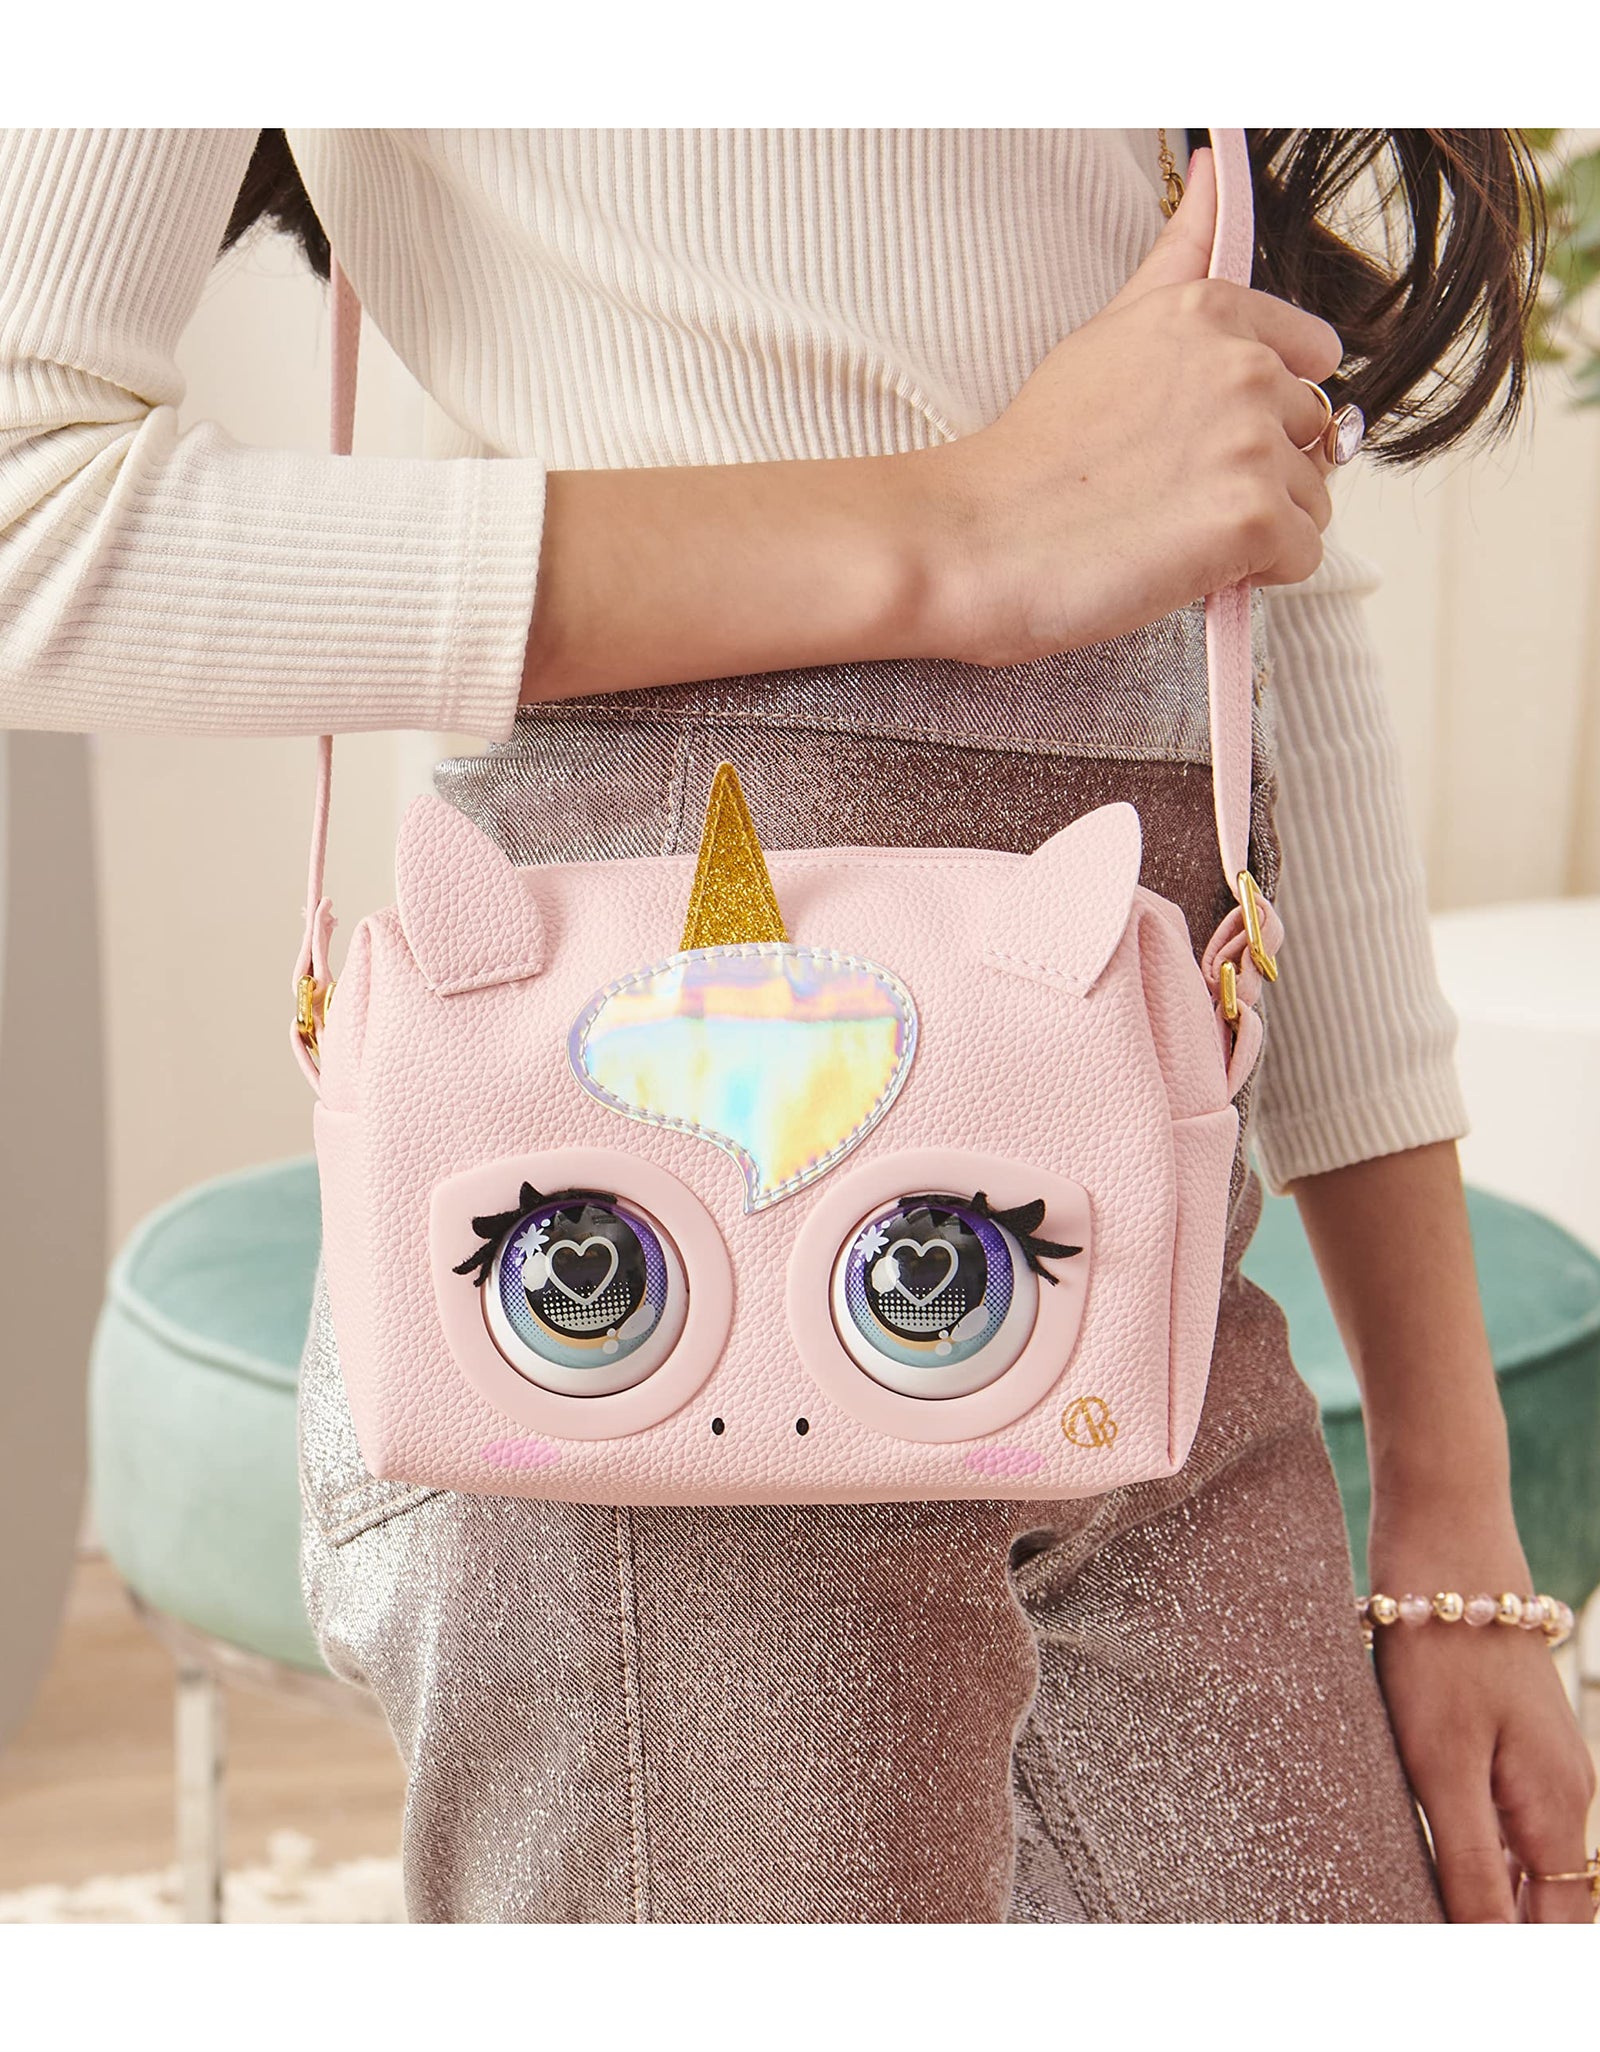 Purse Pets, Glamicorn Unicorn Interactive with Over 25 Sounds and Reactions, Kids Toys for Girls Ages 5 and up